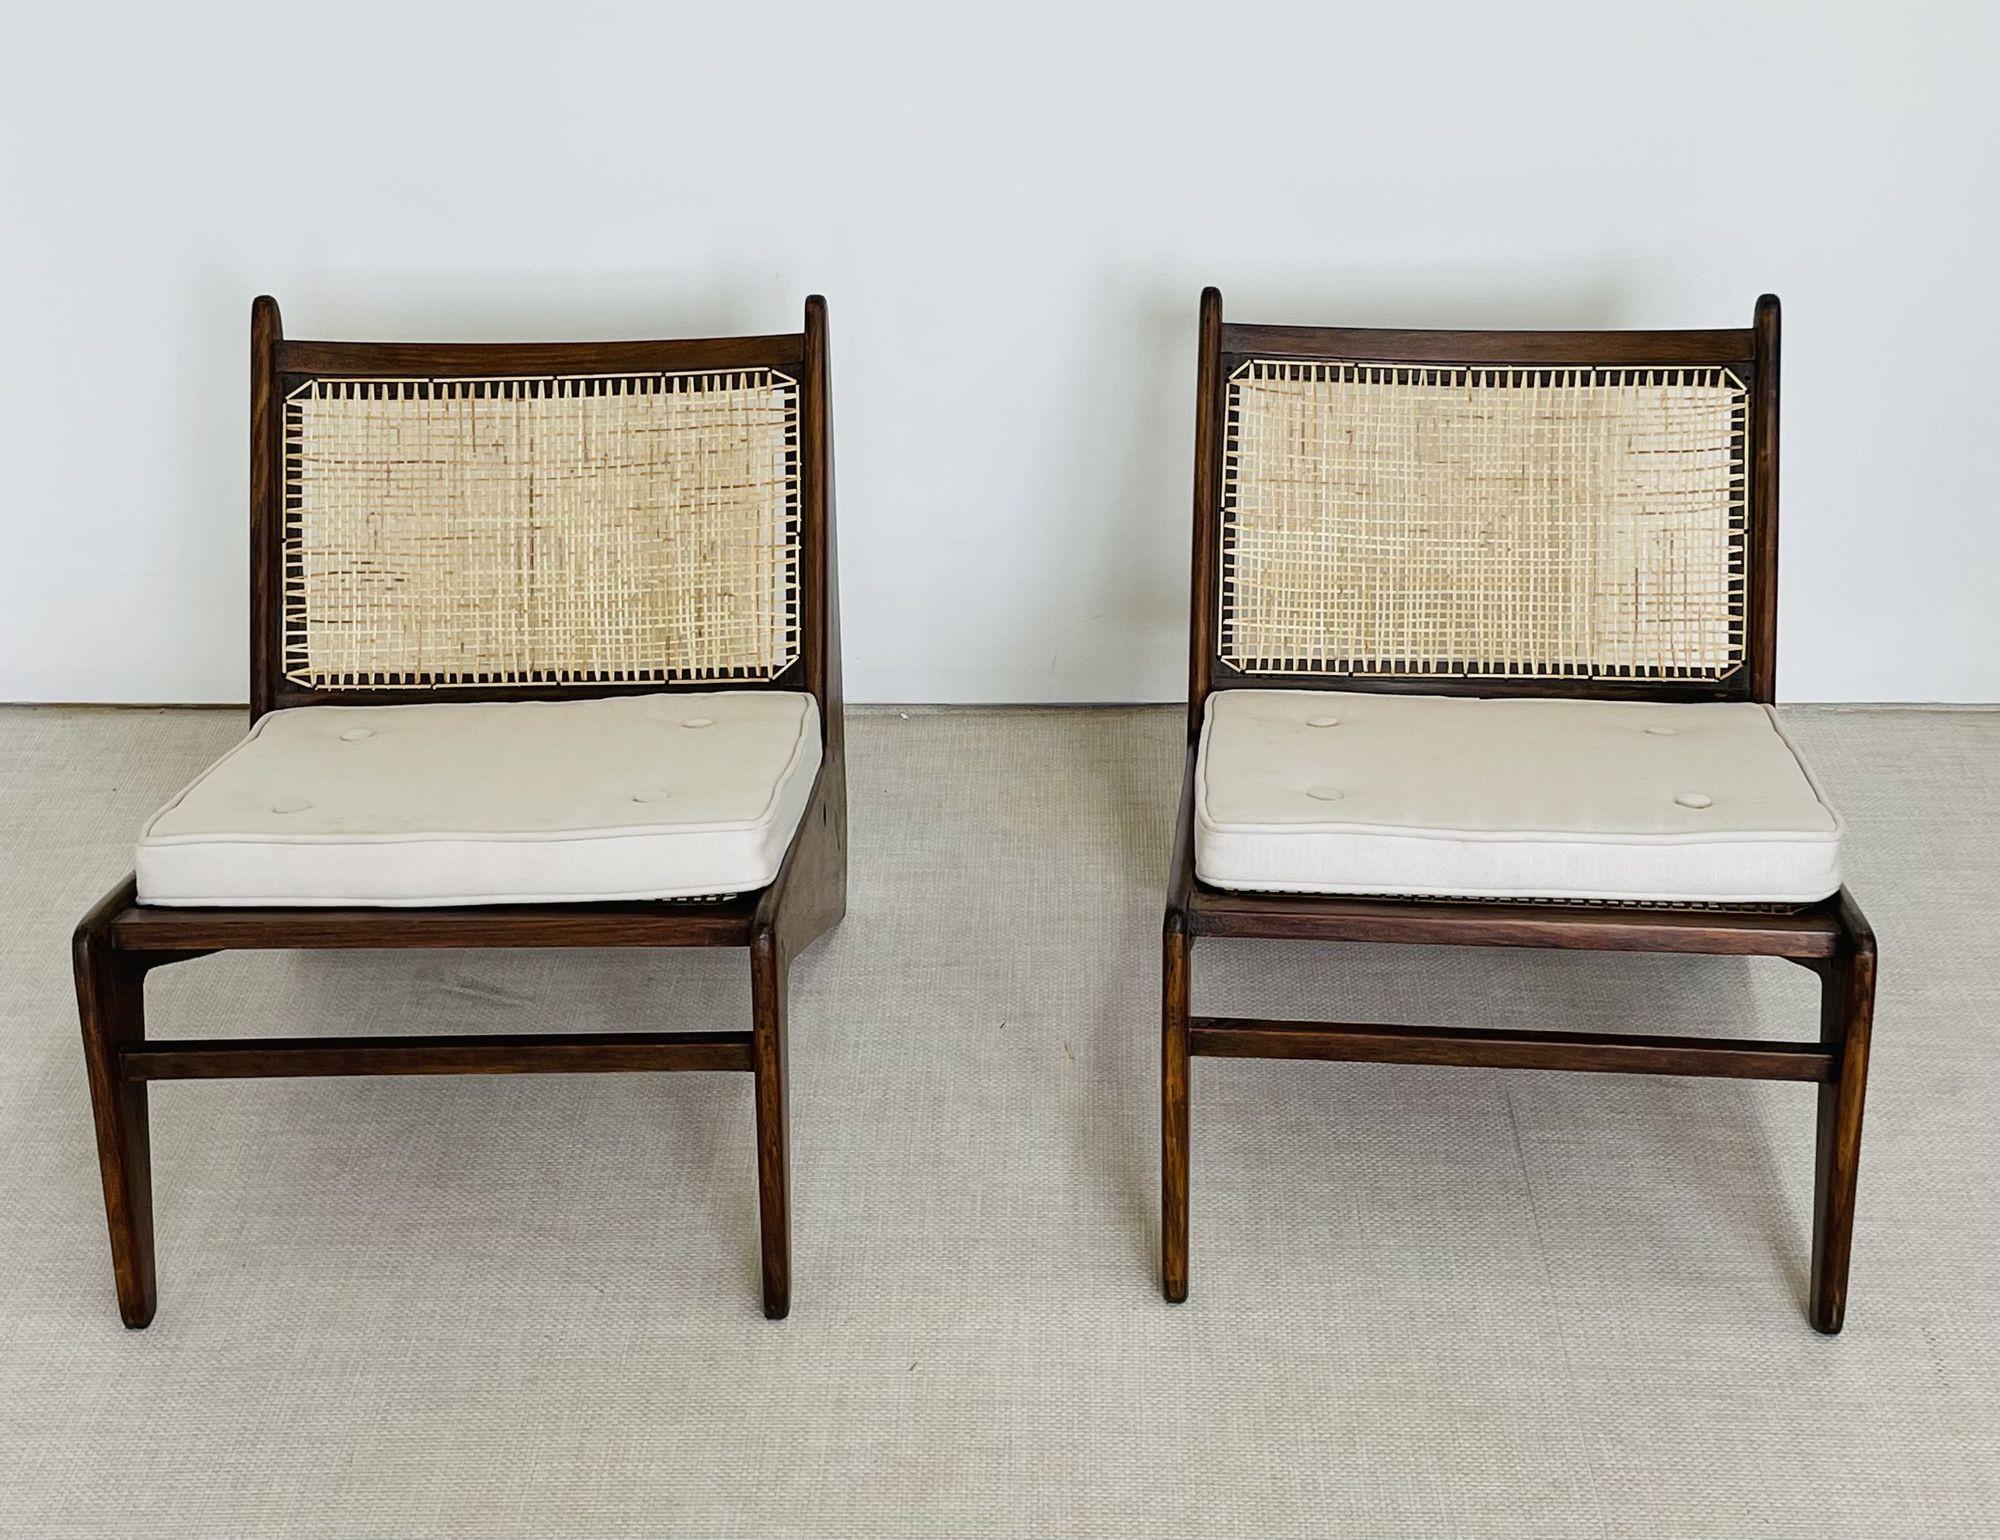 Indian Pierre Jeanneret, French Mid-Century, Kangaroo Chairs, Teak, Cane, India, 1960s For Sale